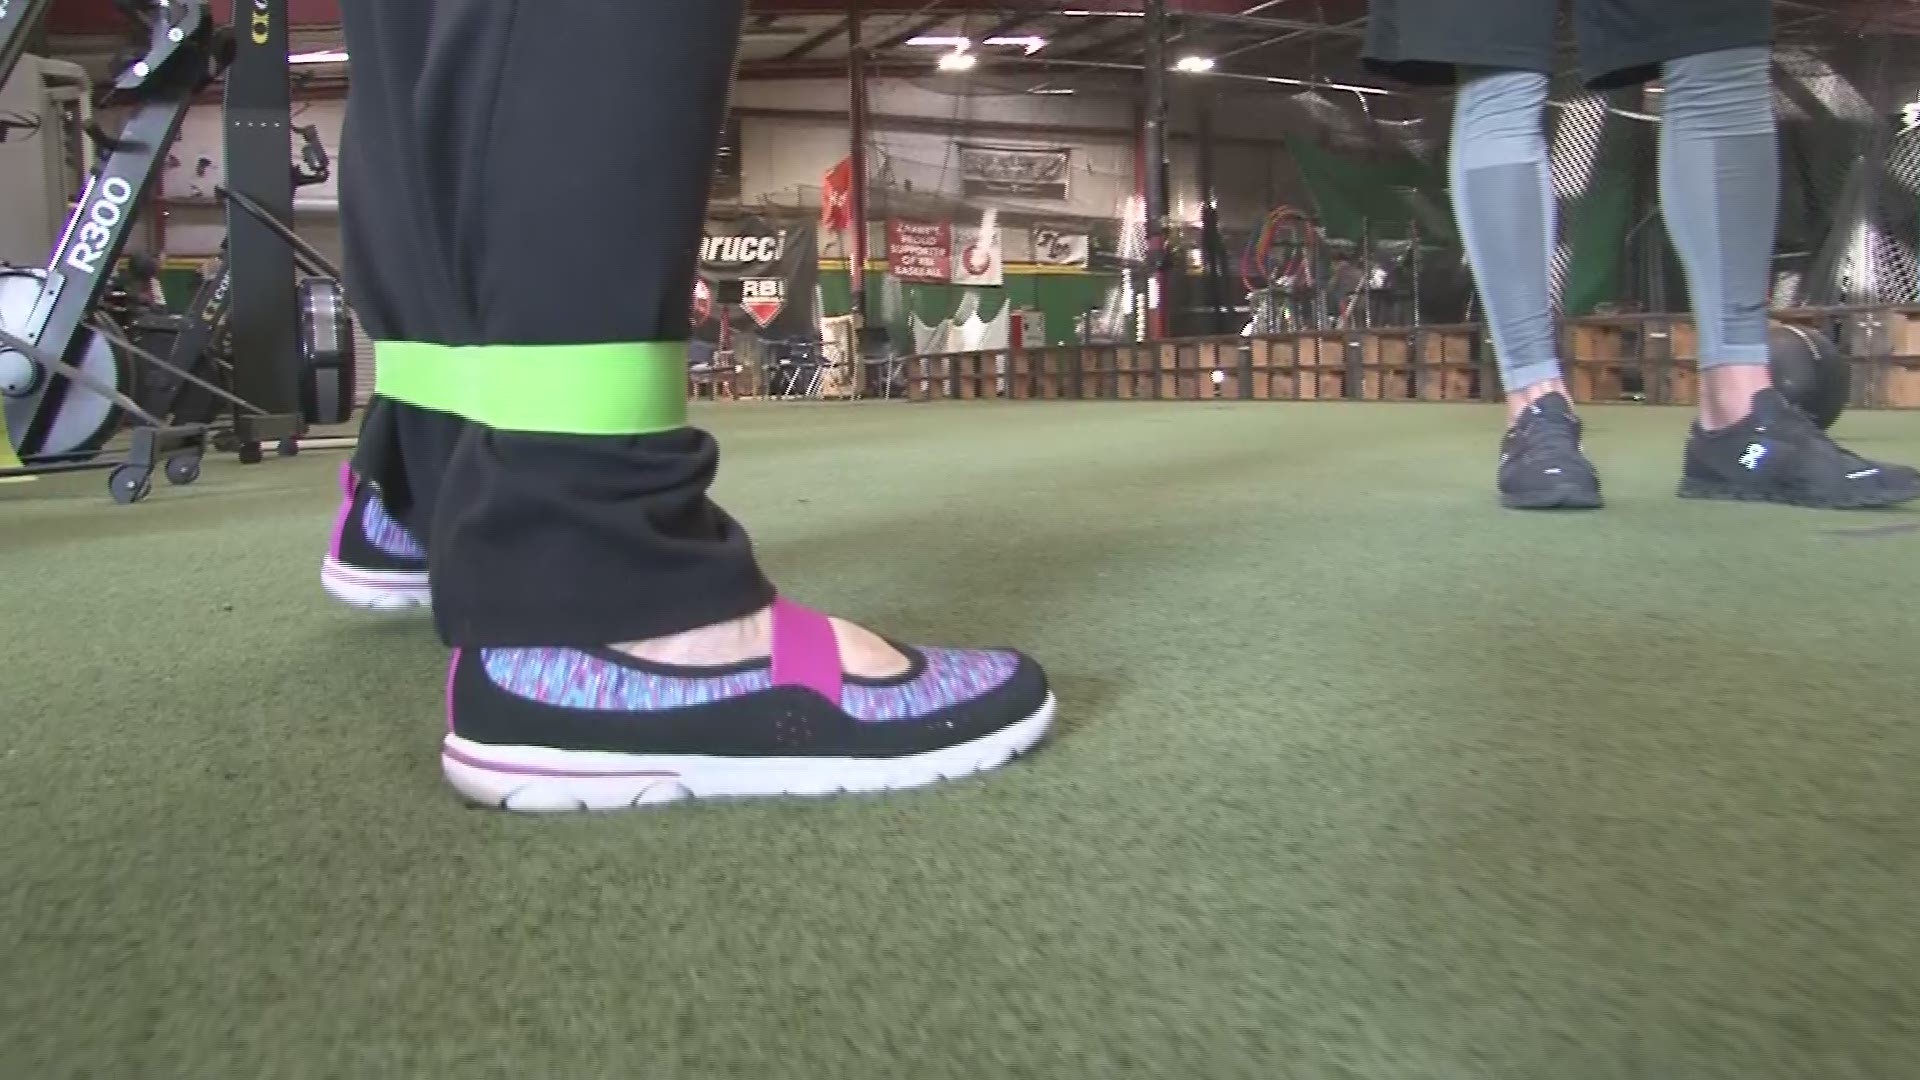 A workout program in West Knoxville is helping cancer survivors find their strength. It's called "Survivor Fitness". It focuses on support after cancer treatment.